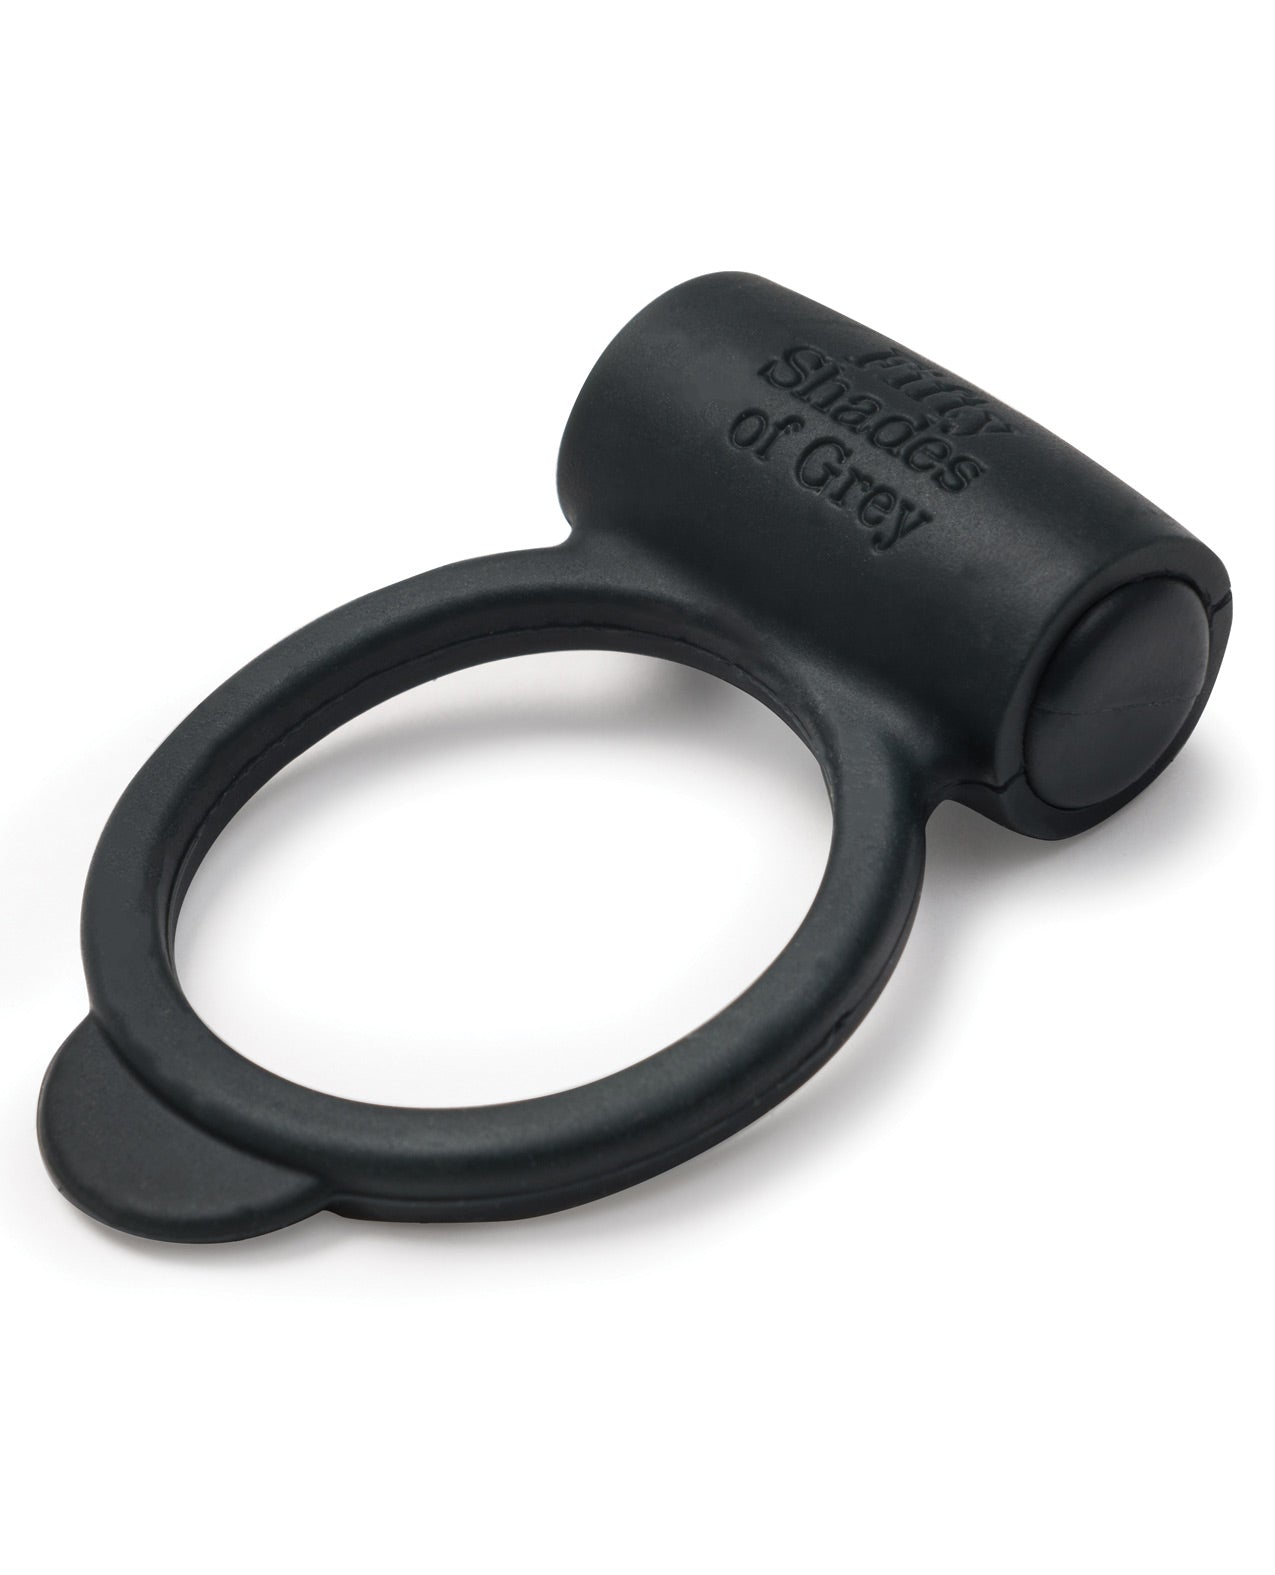 Fifty Shades Of Grey Yours And Mine Vibrating Love Ring - LUST Depot